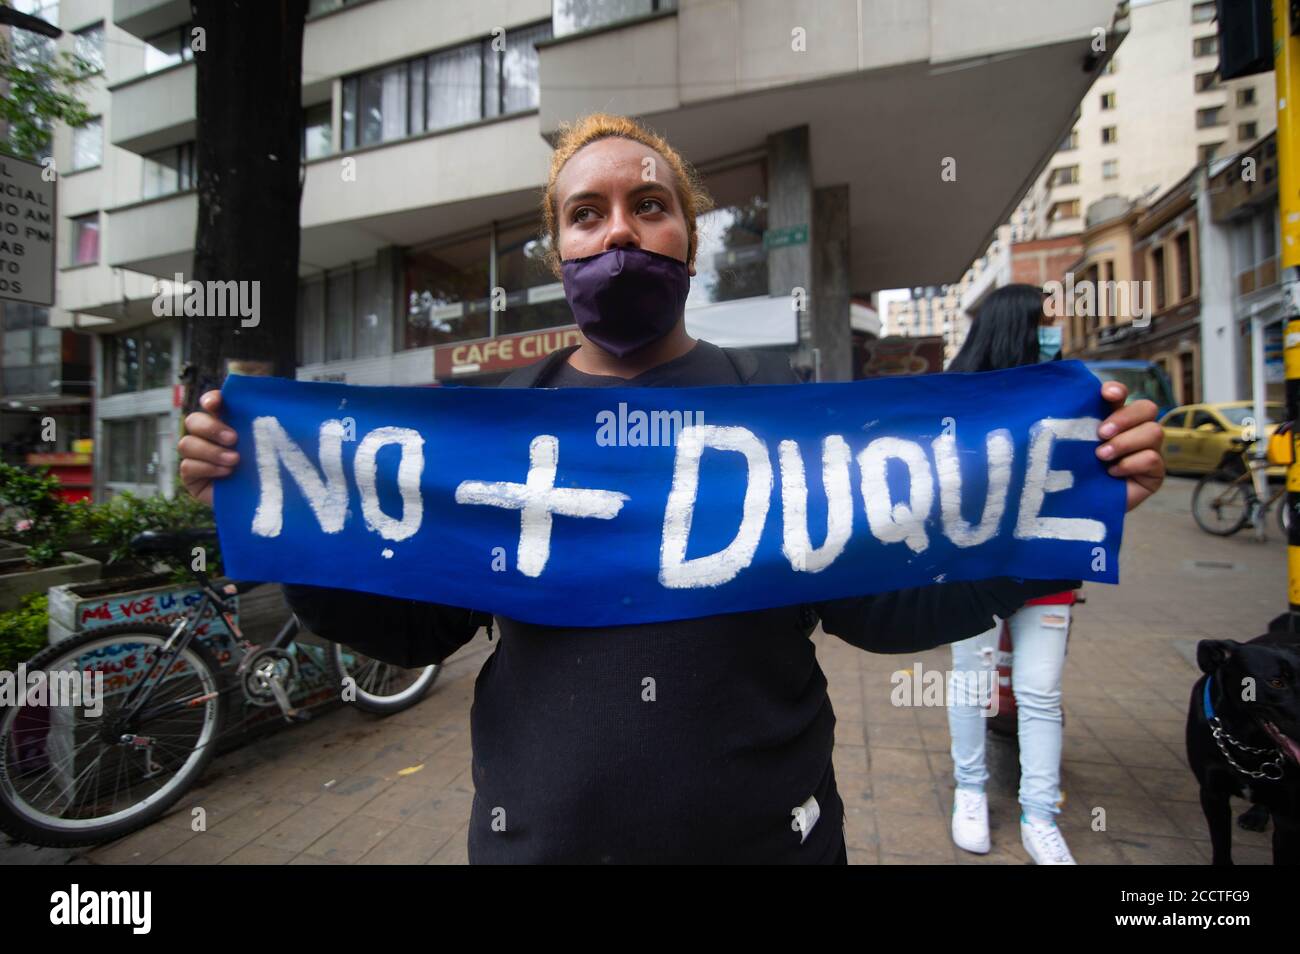 Bogota, Colombia. 23rd Aug, 2020. A demonstrator holds a sign that refers to No more Duque, refering to the former president of Colombia, Ivan Duque Marquez during the Memorial Demonstrations for Dilan Cruz on August 23 2020 in Bogota, Colombia. Dilan Cruz was a high school student who was shot by a riot police officer during the 2019 national strike in Colombia, on the demonstrations that took place on november 23 2019. (Photo by Sebastian Barros Salamanca/Pacific Press/Sipa USA) Credit: Sipa USA/Alamy Live News Stock Photo